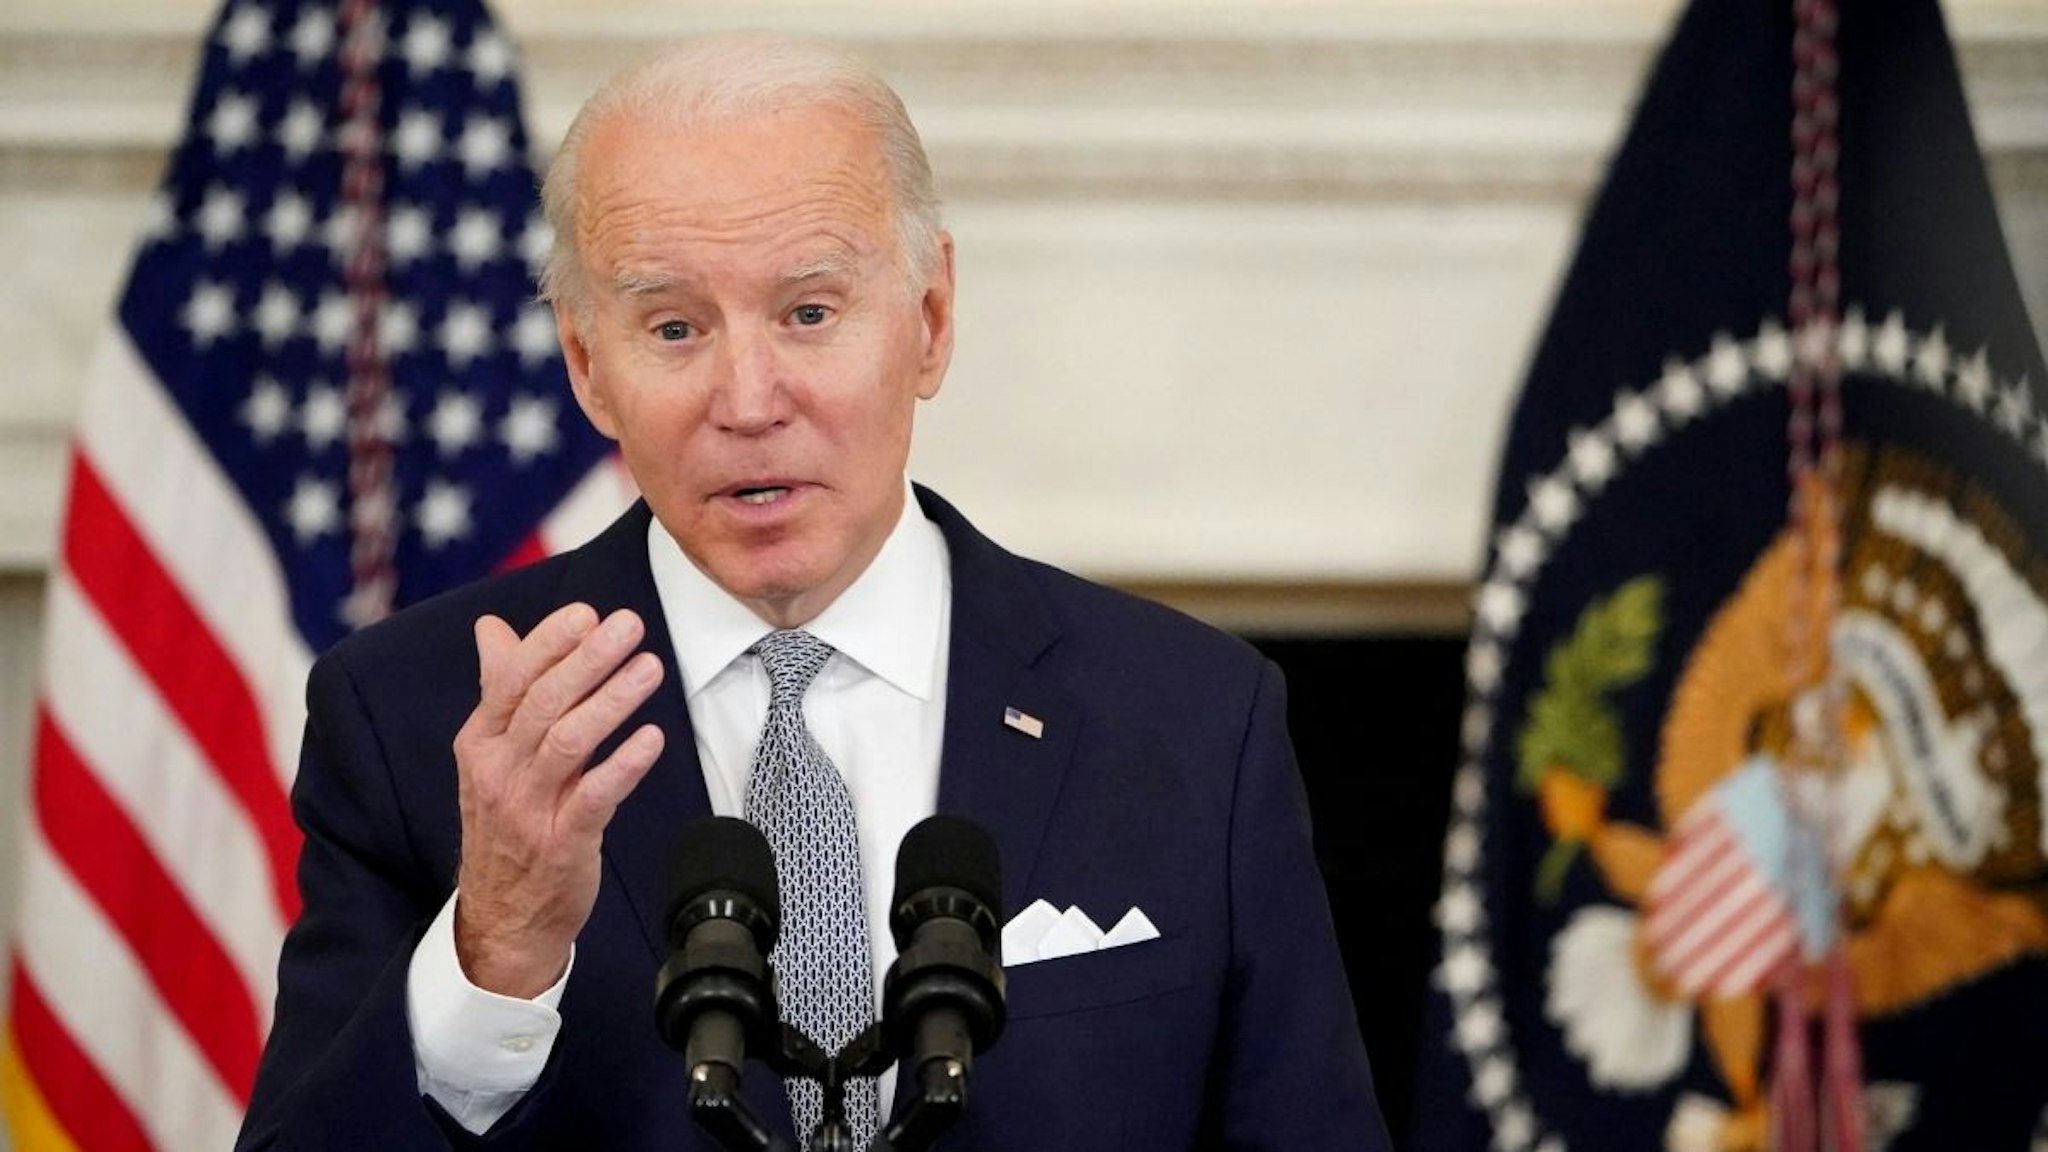 US President Joe Biden speaks about the December jobs report on January 7, 2022, from the State Dining Room of the White House in Washington, DC.